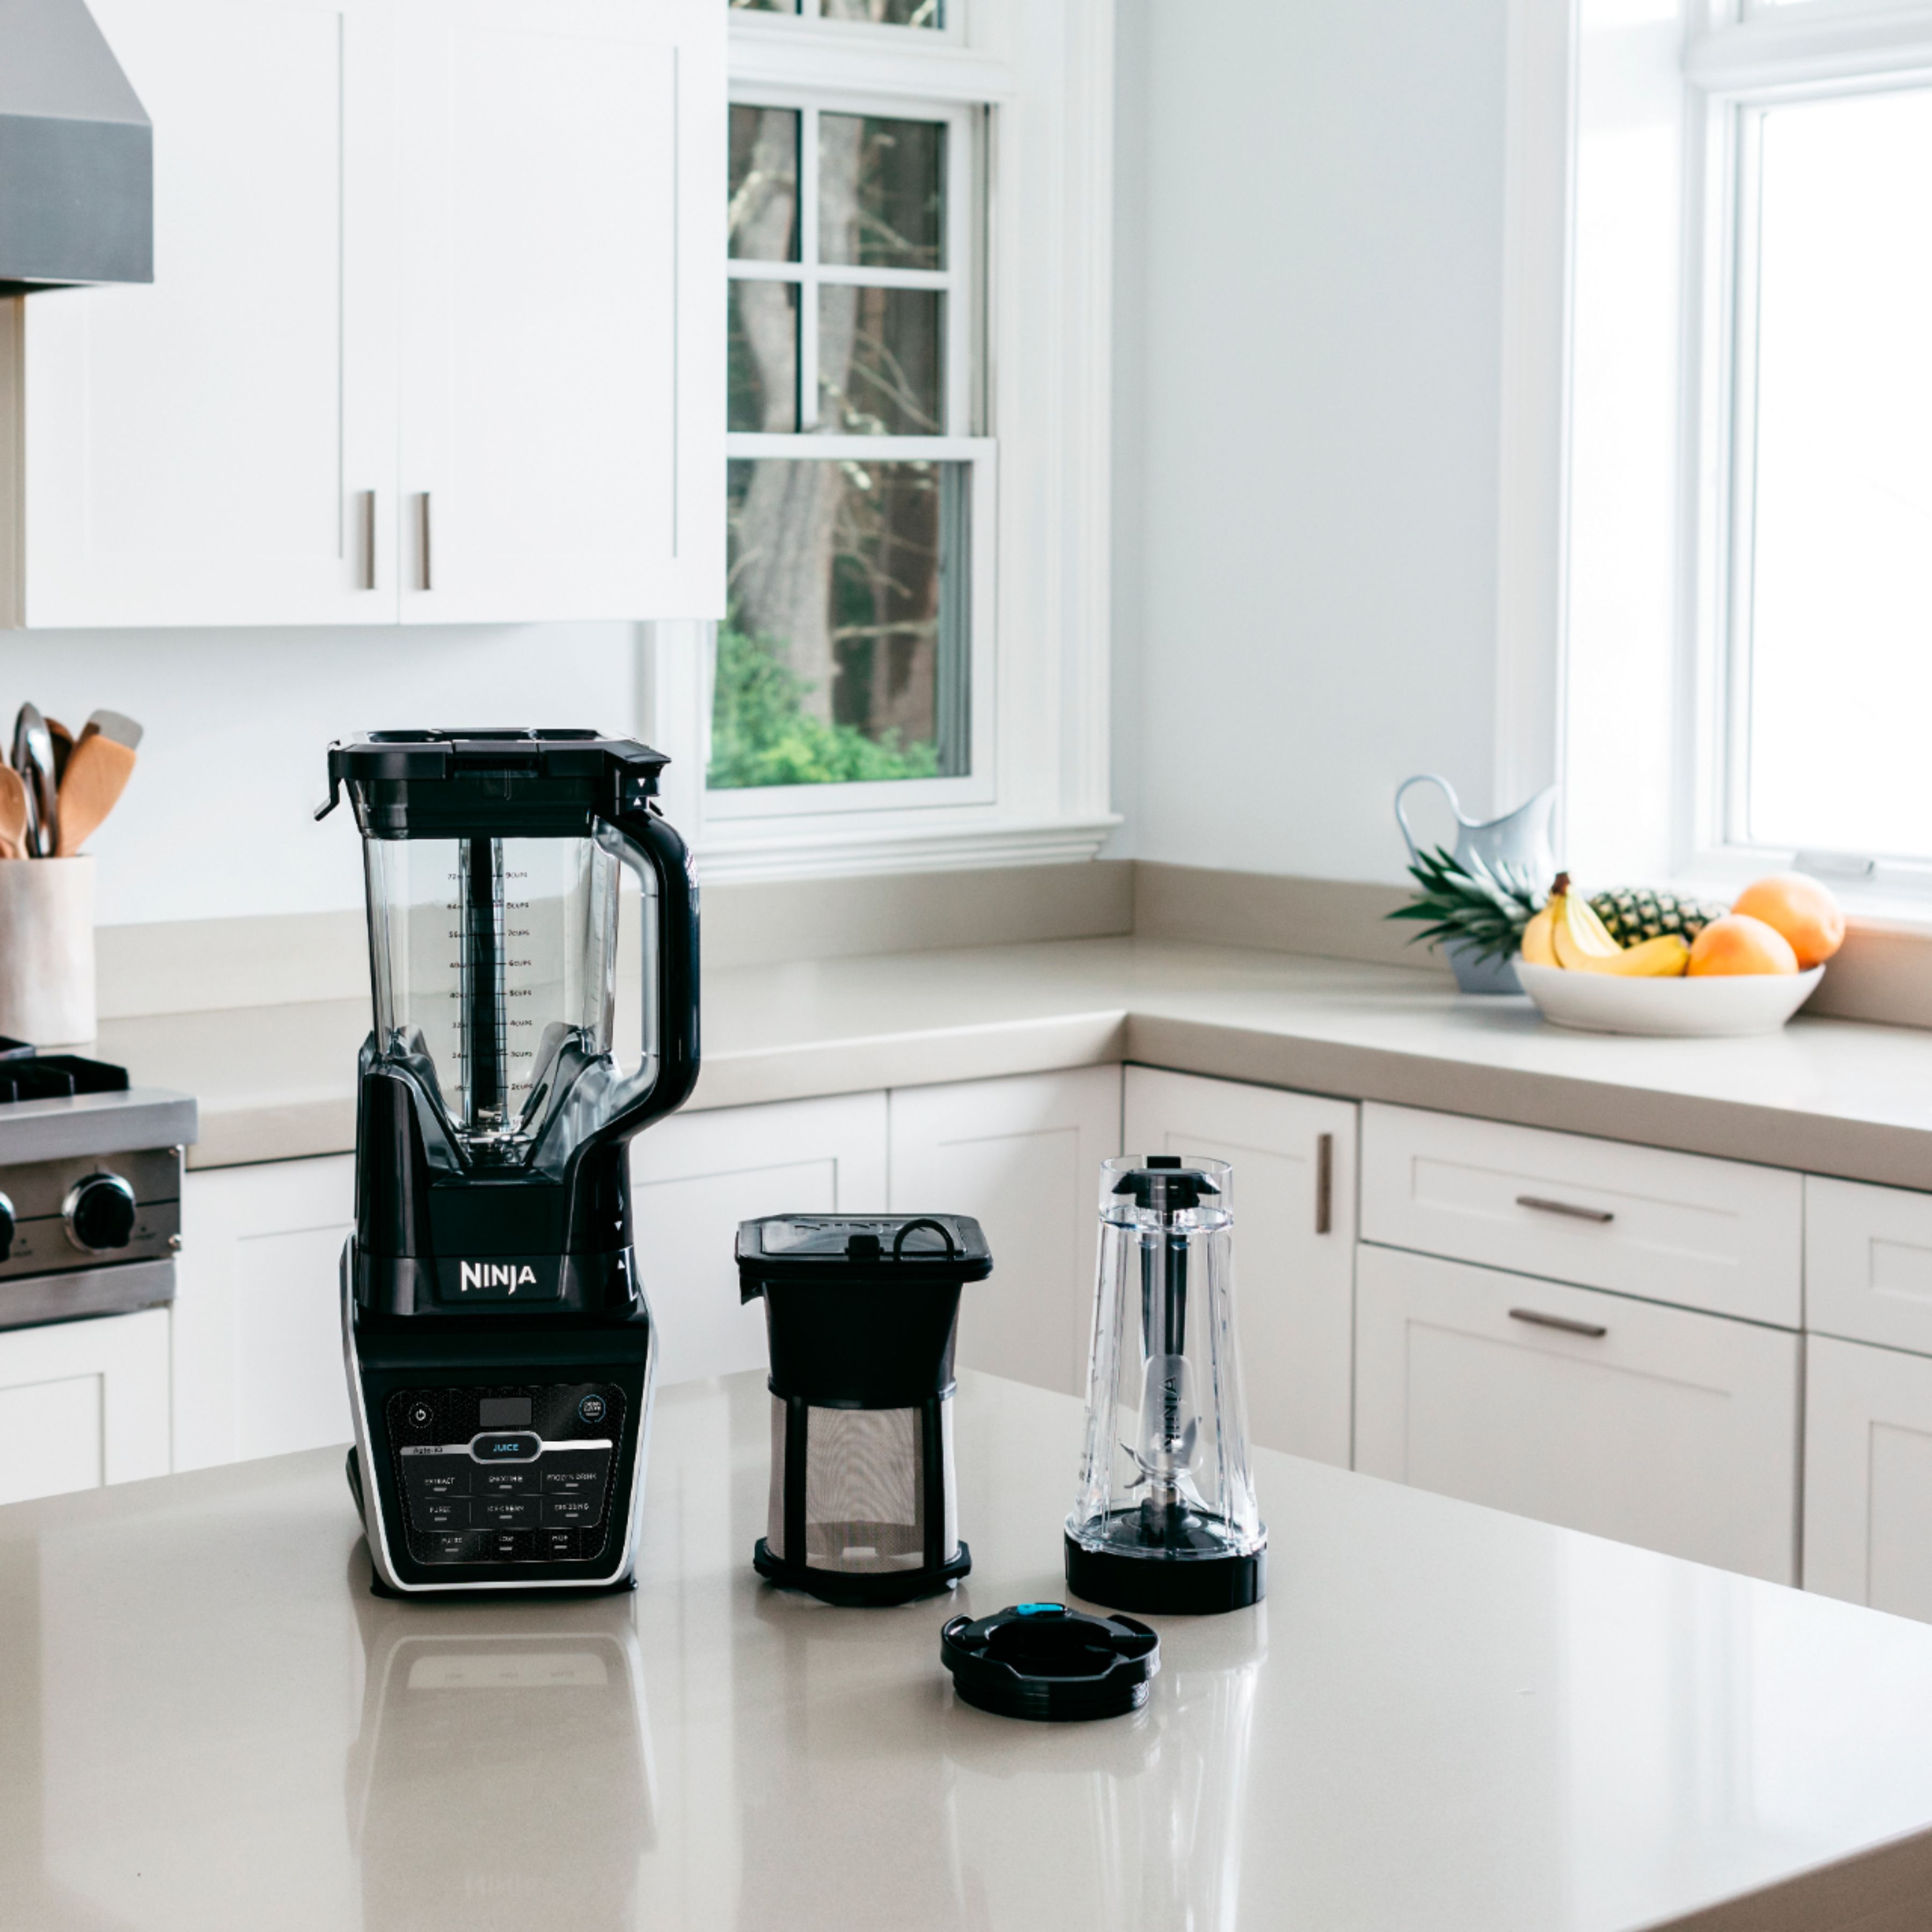 Ninja Blender DUO with Vacuum Blending and Micro-Juice Technology